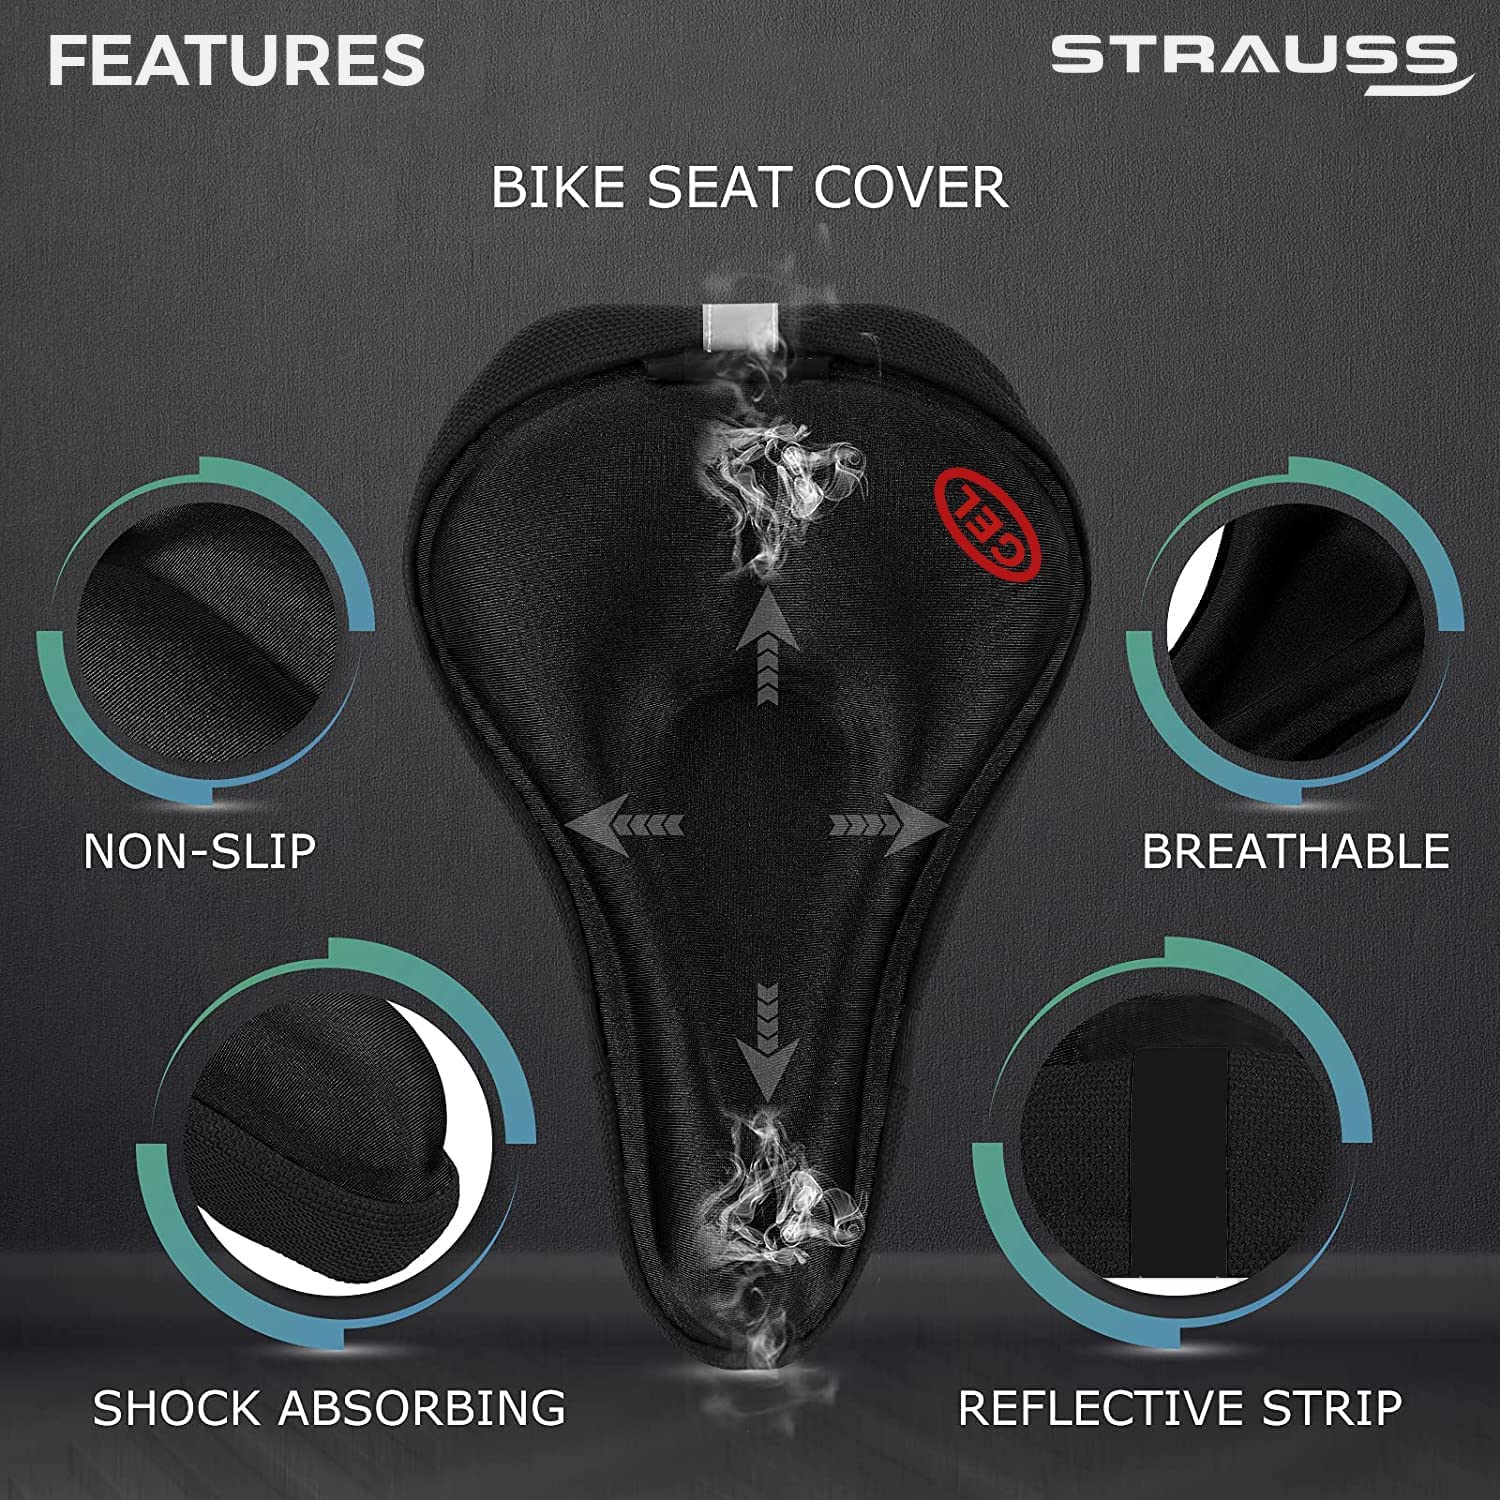 Silicone Gel Cycle Seat Cover |Cycle Saddle Cover|Cycle Seat Cushion (Pack of 2)